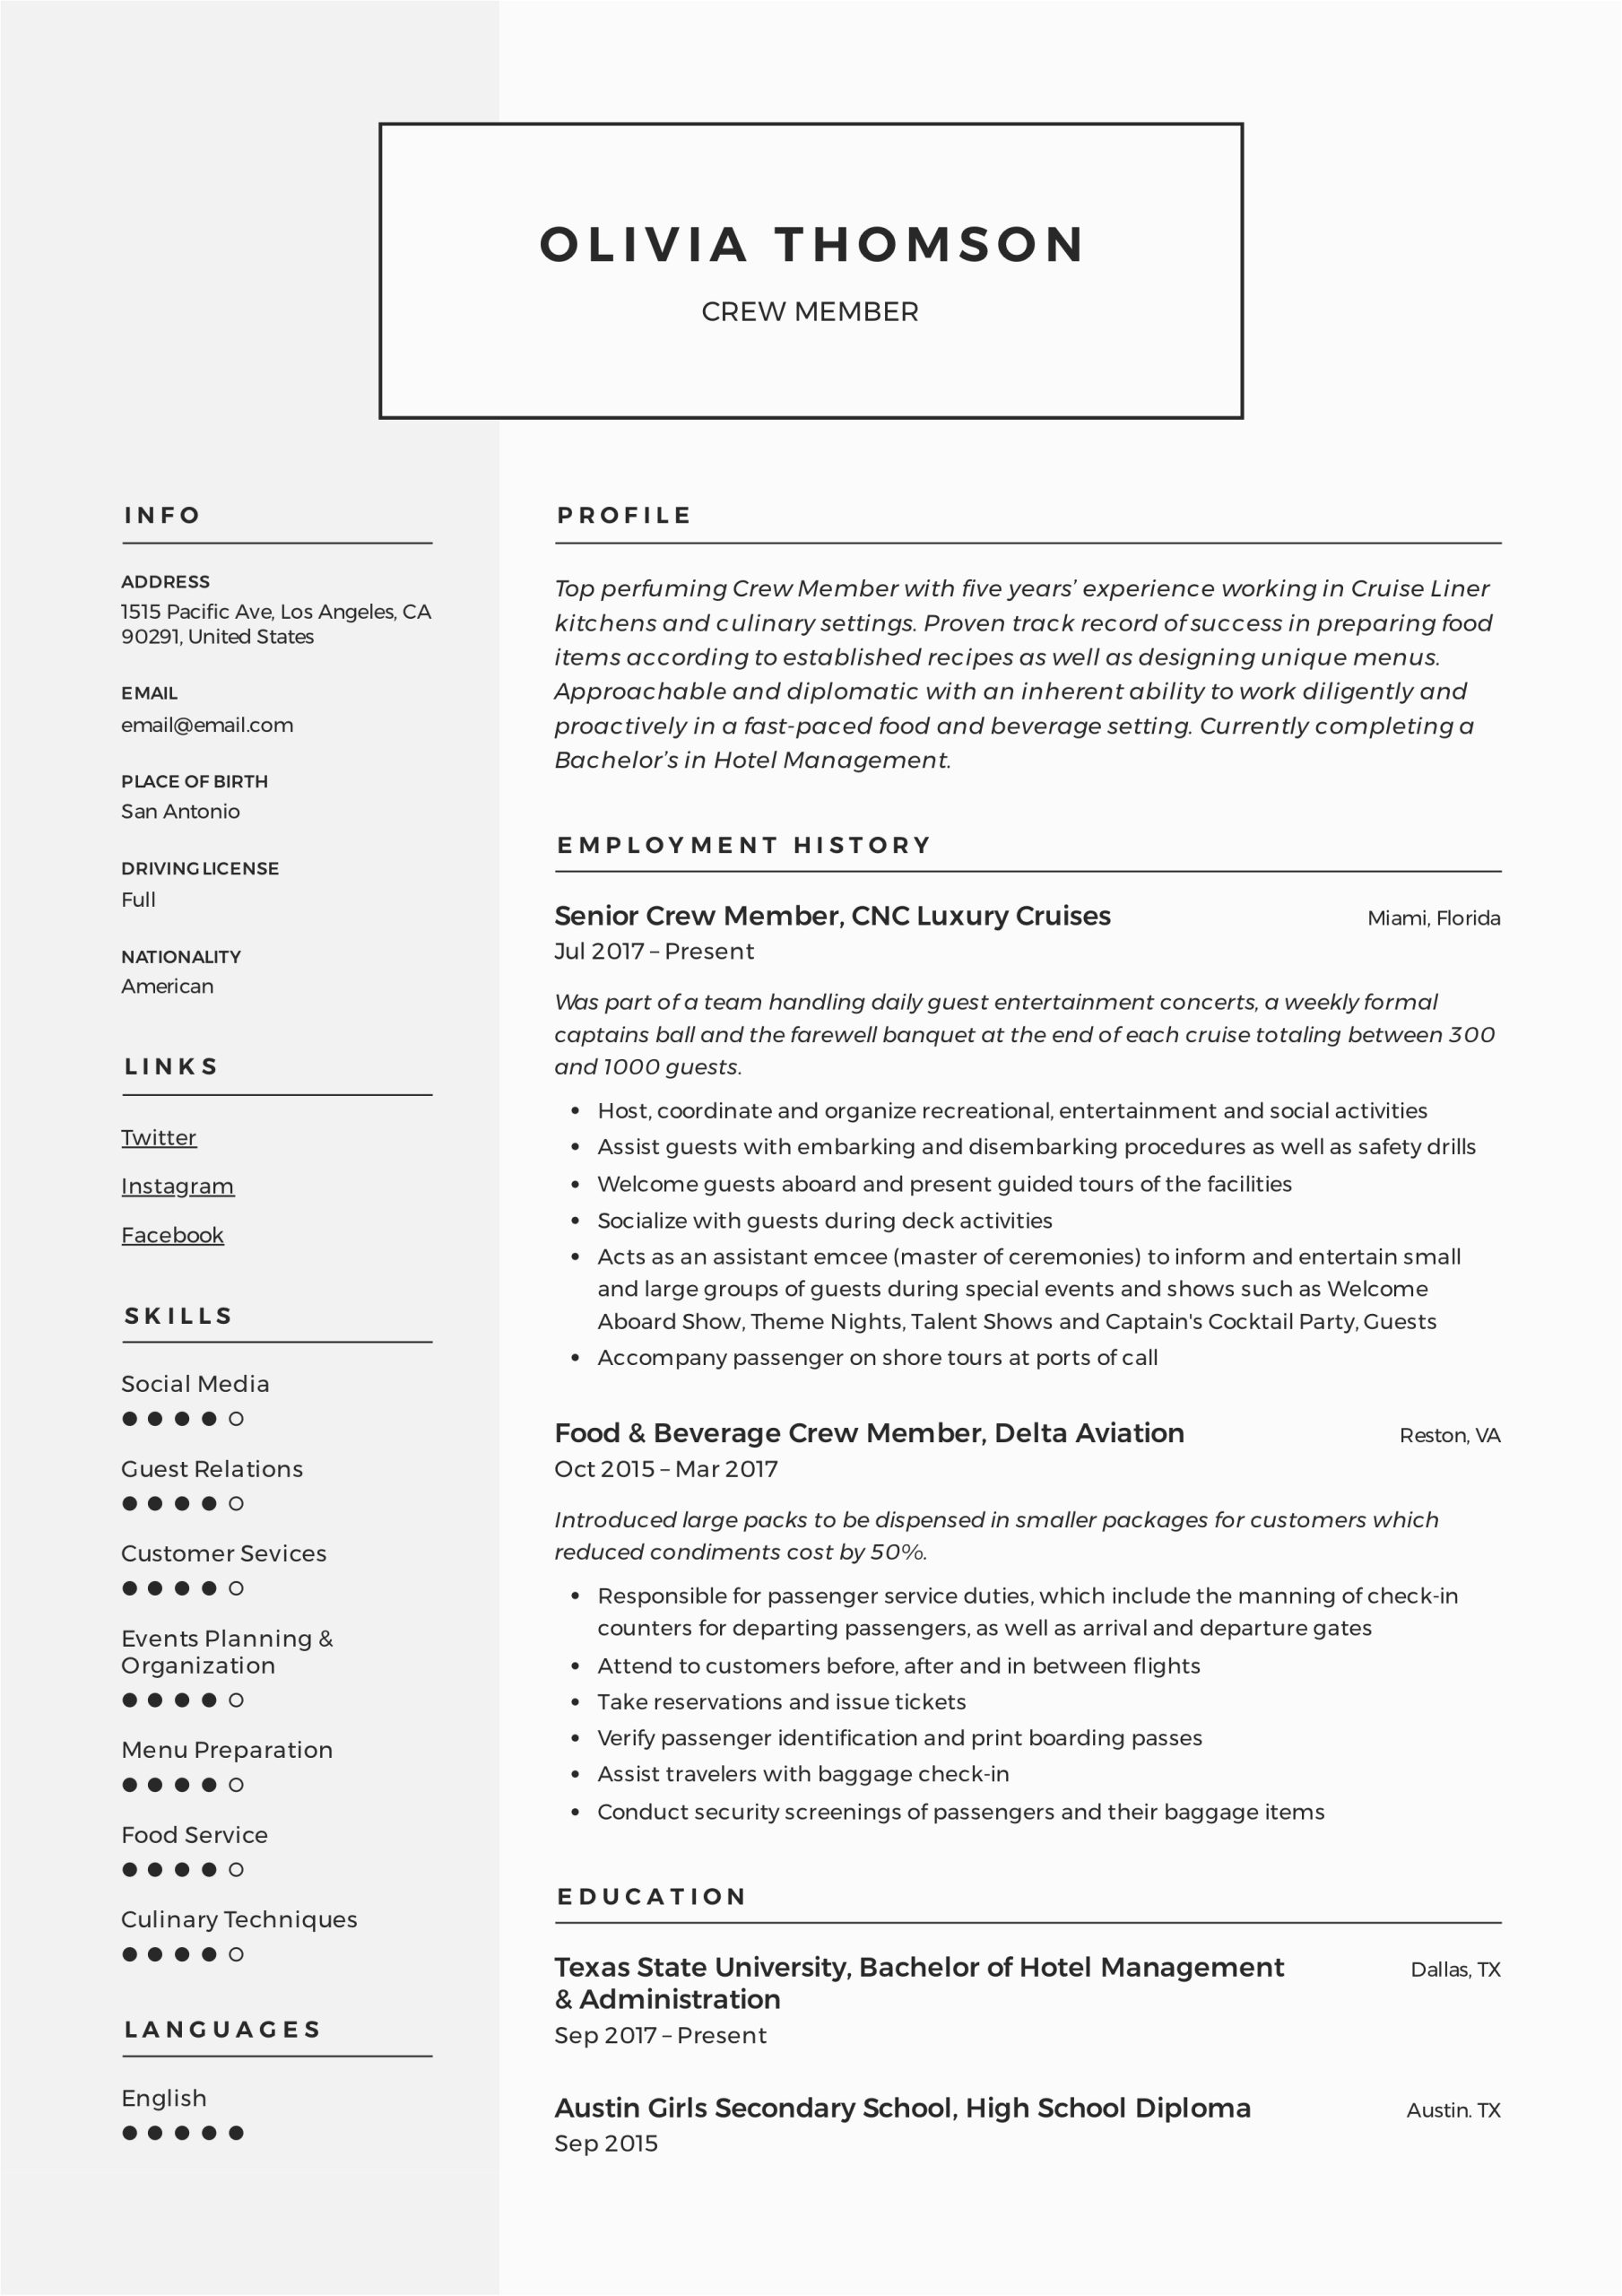 Sample Resume for Fast Food Service Crew without Experience Crew Member Resume & Writing Guide